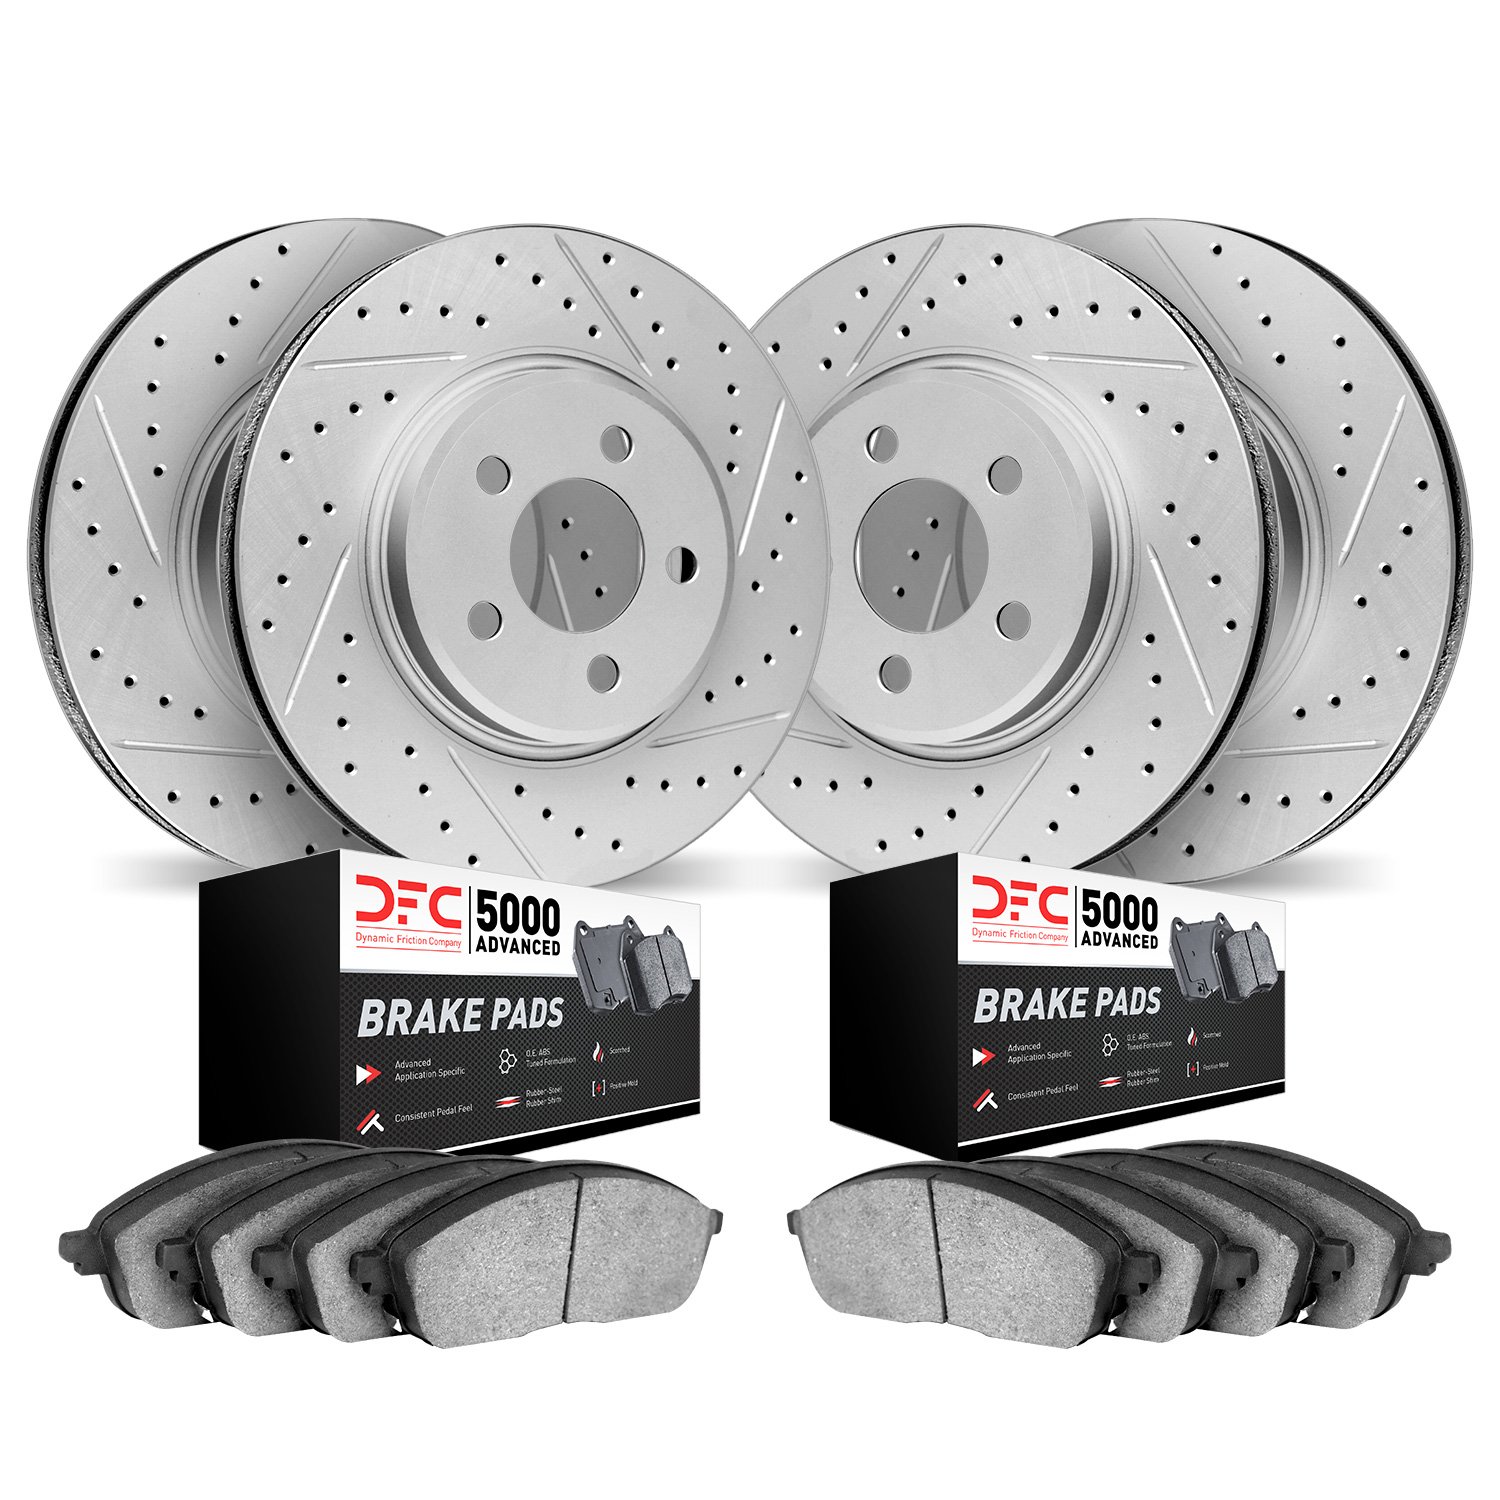 2504-40101 Geoperformance Drilled/Slotted Rotors w/5000 Advanced Brake Pads Kit, 2005-2006 Mopar, Position: Front and Rear